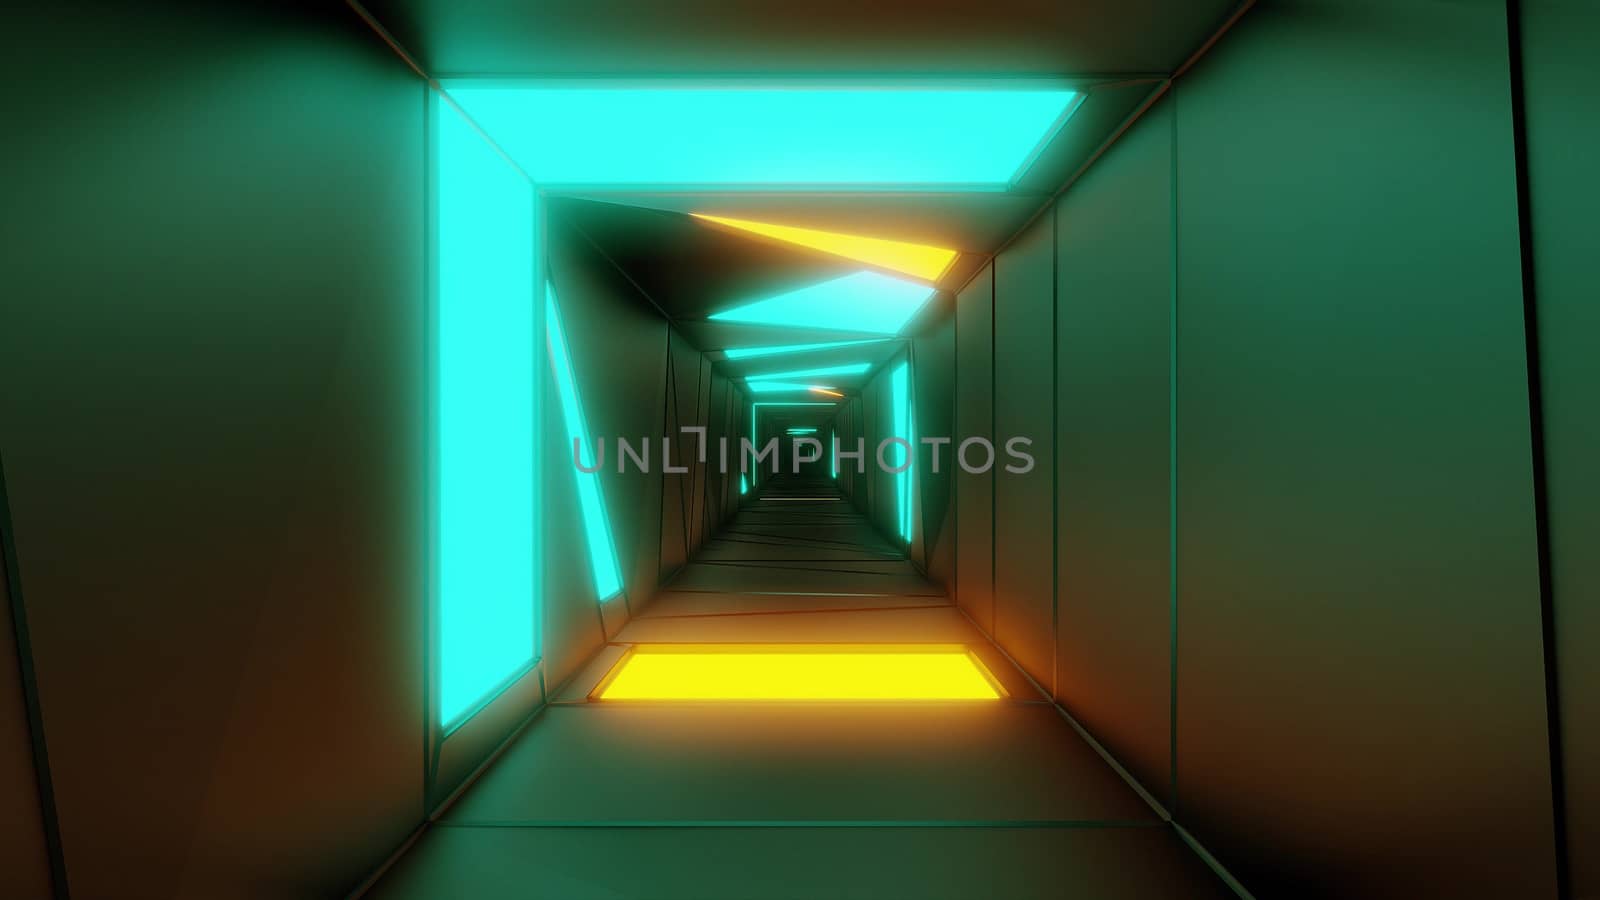 highly abstract design tunnel corridor with glowing light patterns 3d illustration wallpaper background, emndless visual tunnel 3d rendering art